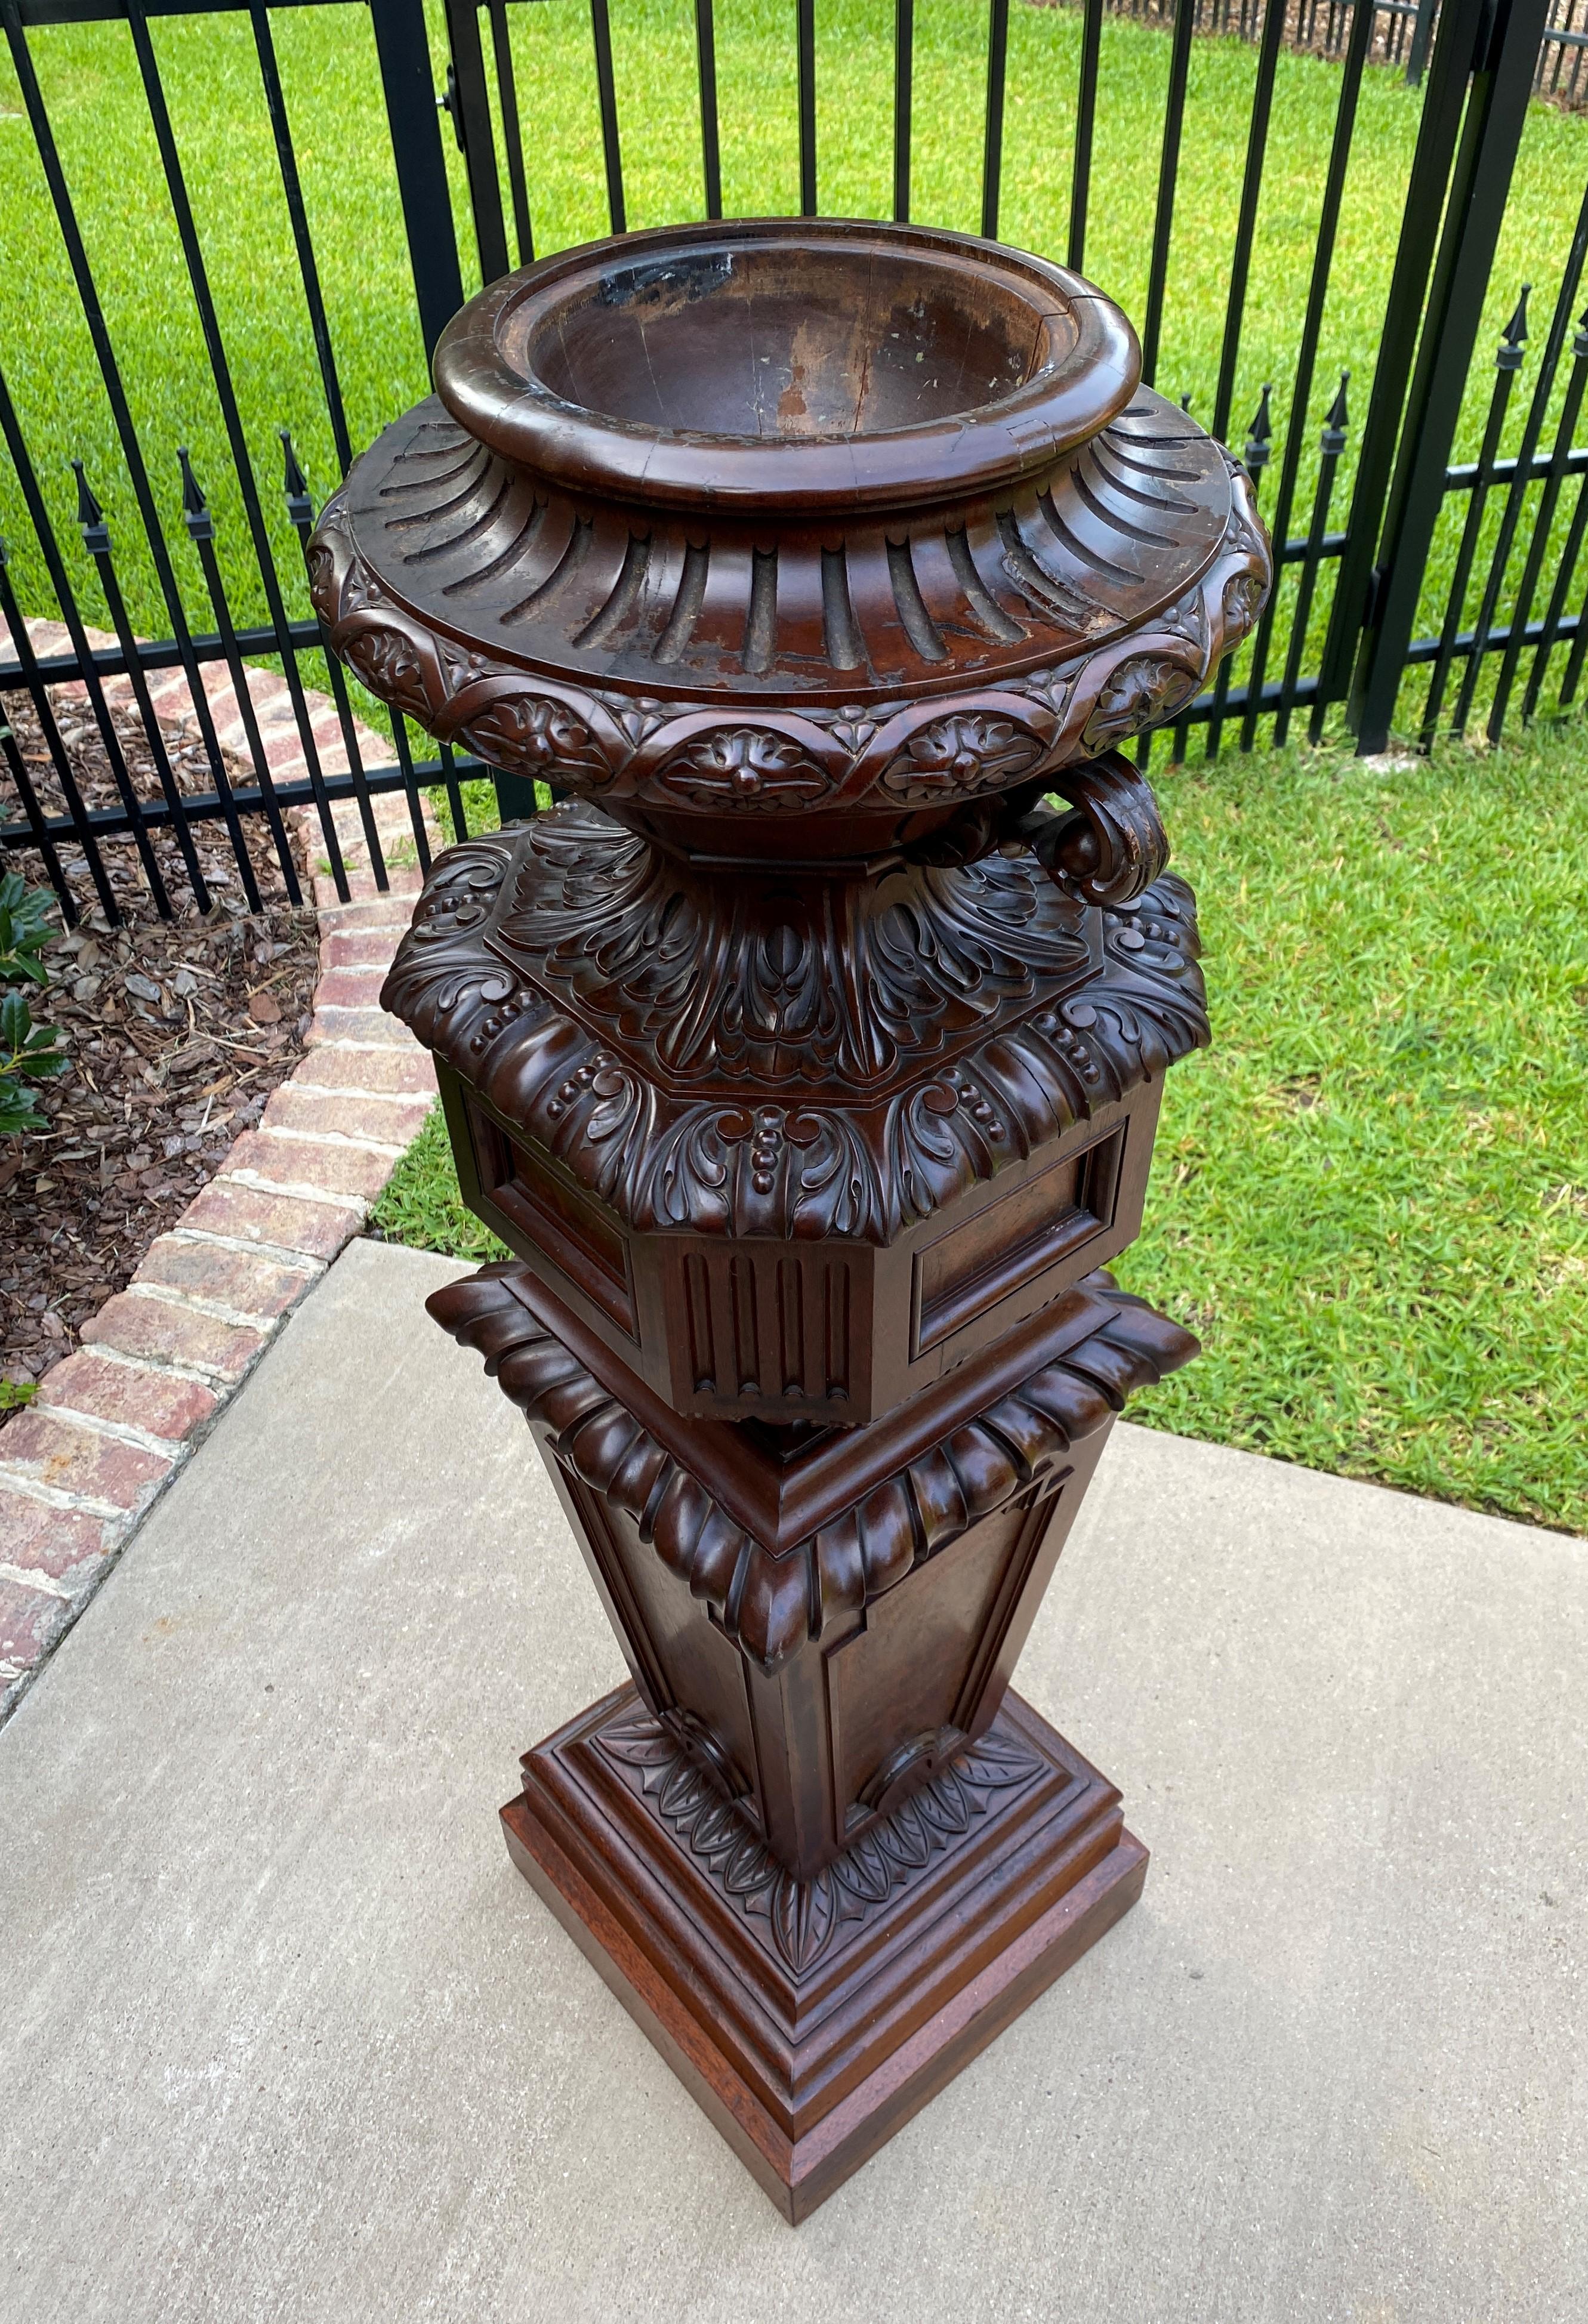 Antique French Pedestal Plant Stand Urn Planter Display Table Mahogany 19C 5